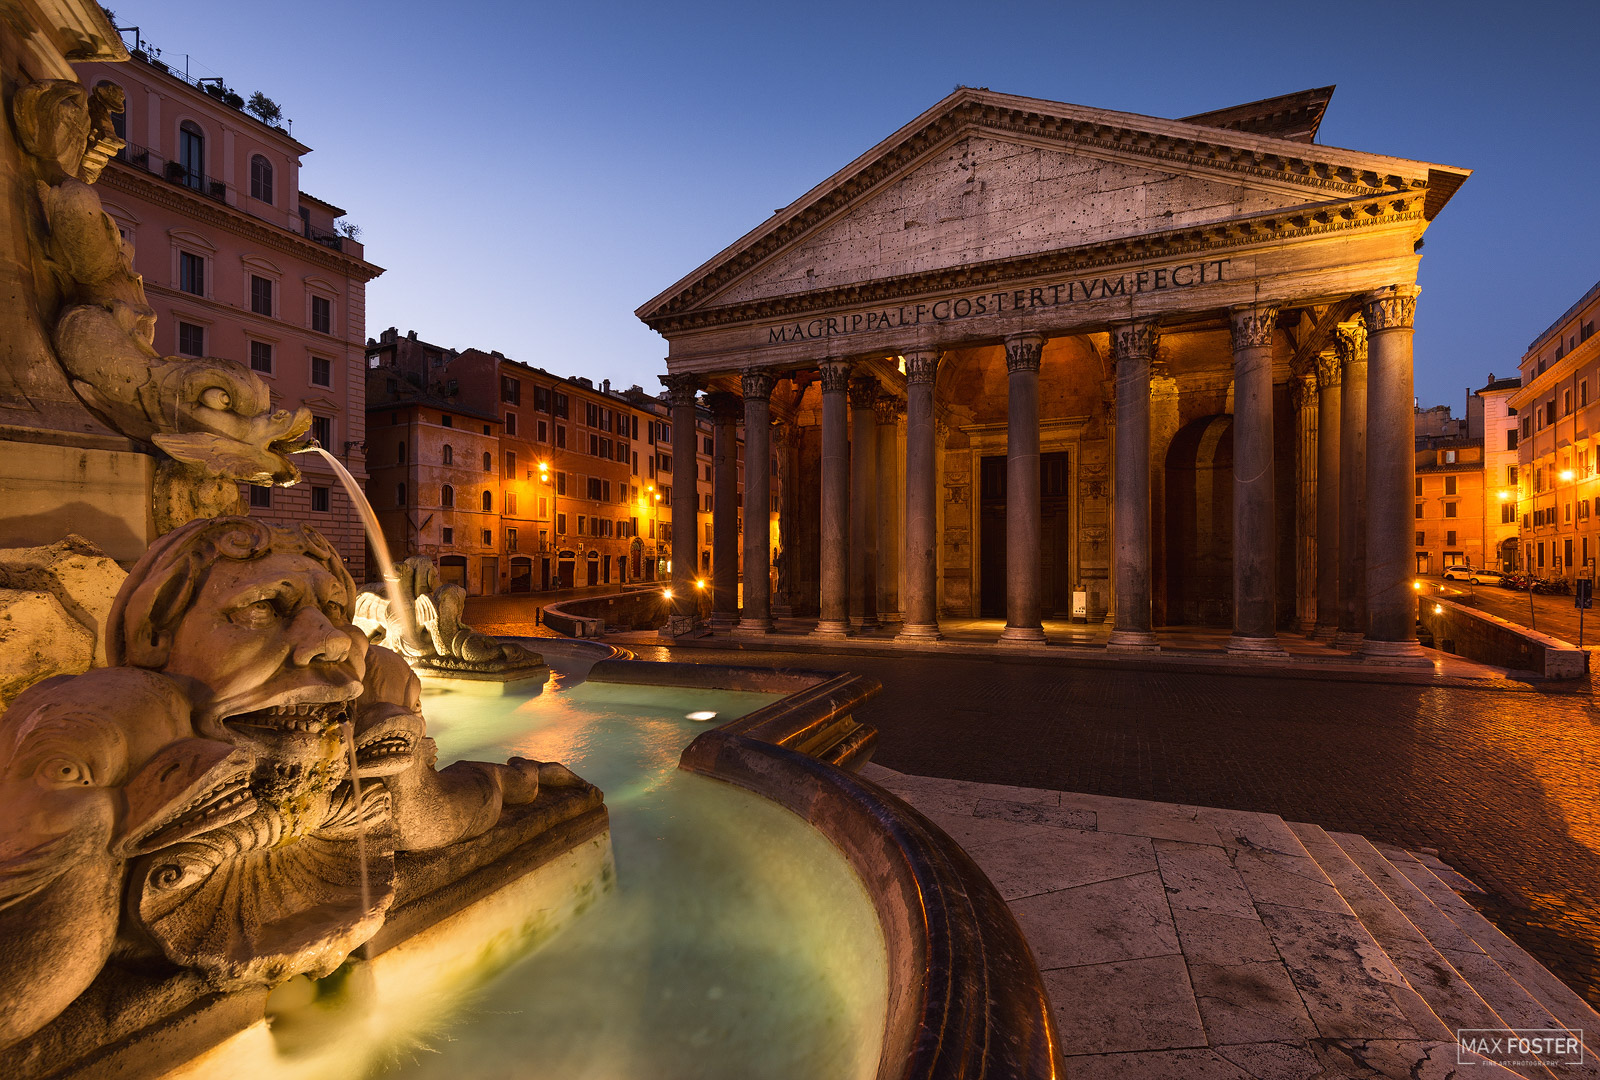 Refresh your space with Temple Of The Gods, Max Foster's limited edition photography print of The Pantheon in Rome from his Italy...